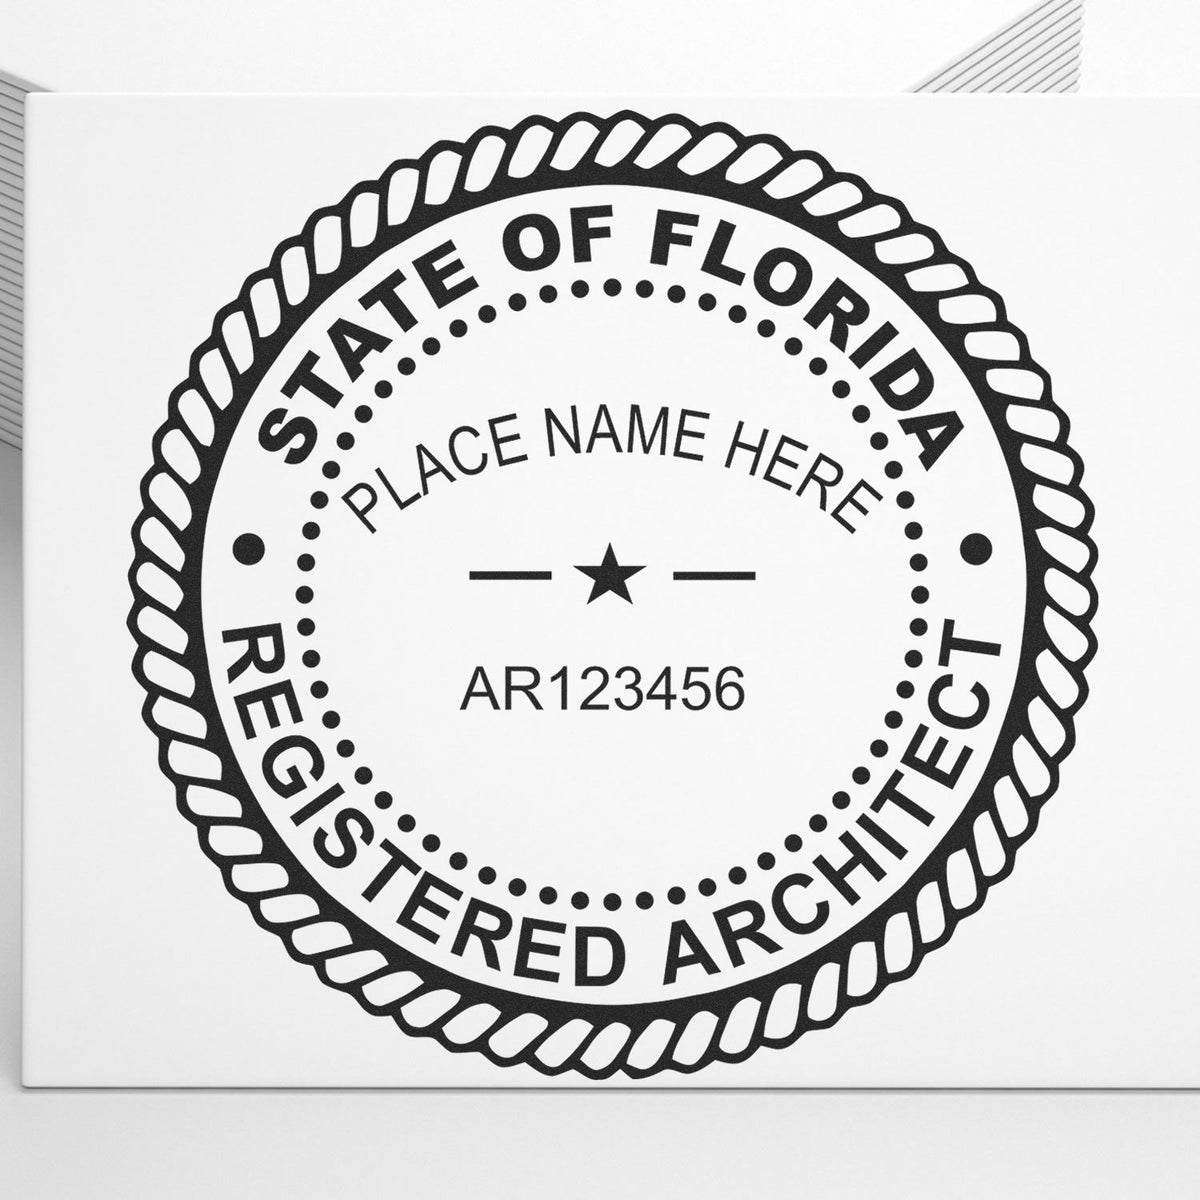 Slim Pre-Inked Florida Architect Seal Stamp in use photo showing a stamped imprint of the Slim Pre-Inked Florida Architect Seal Stamp